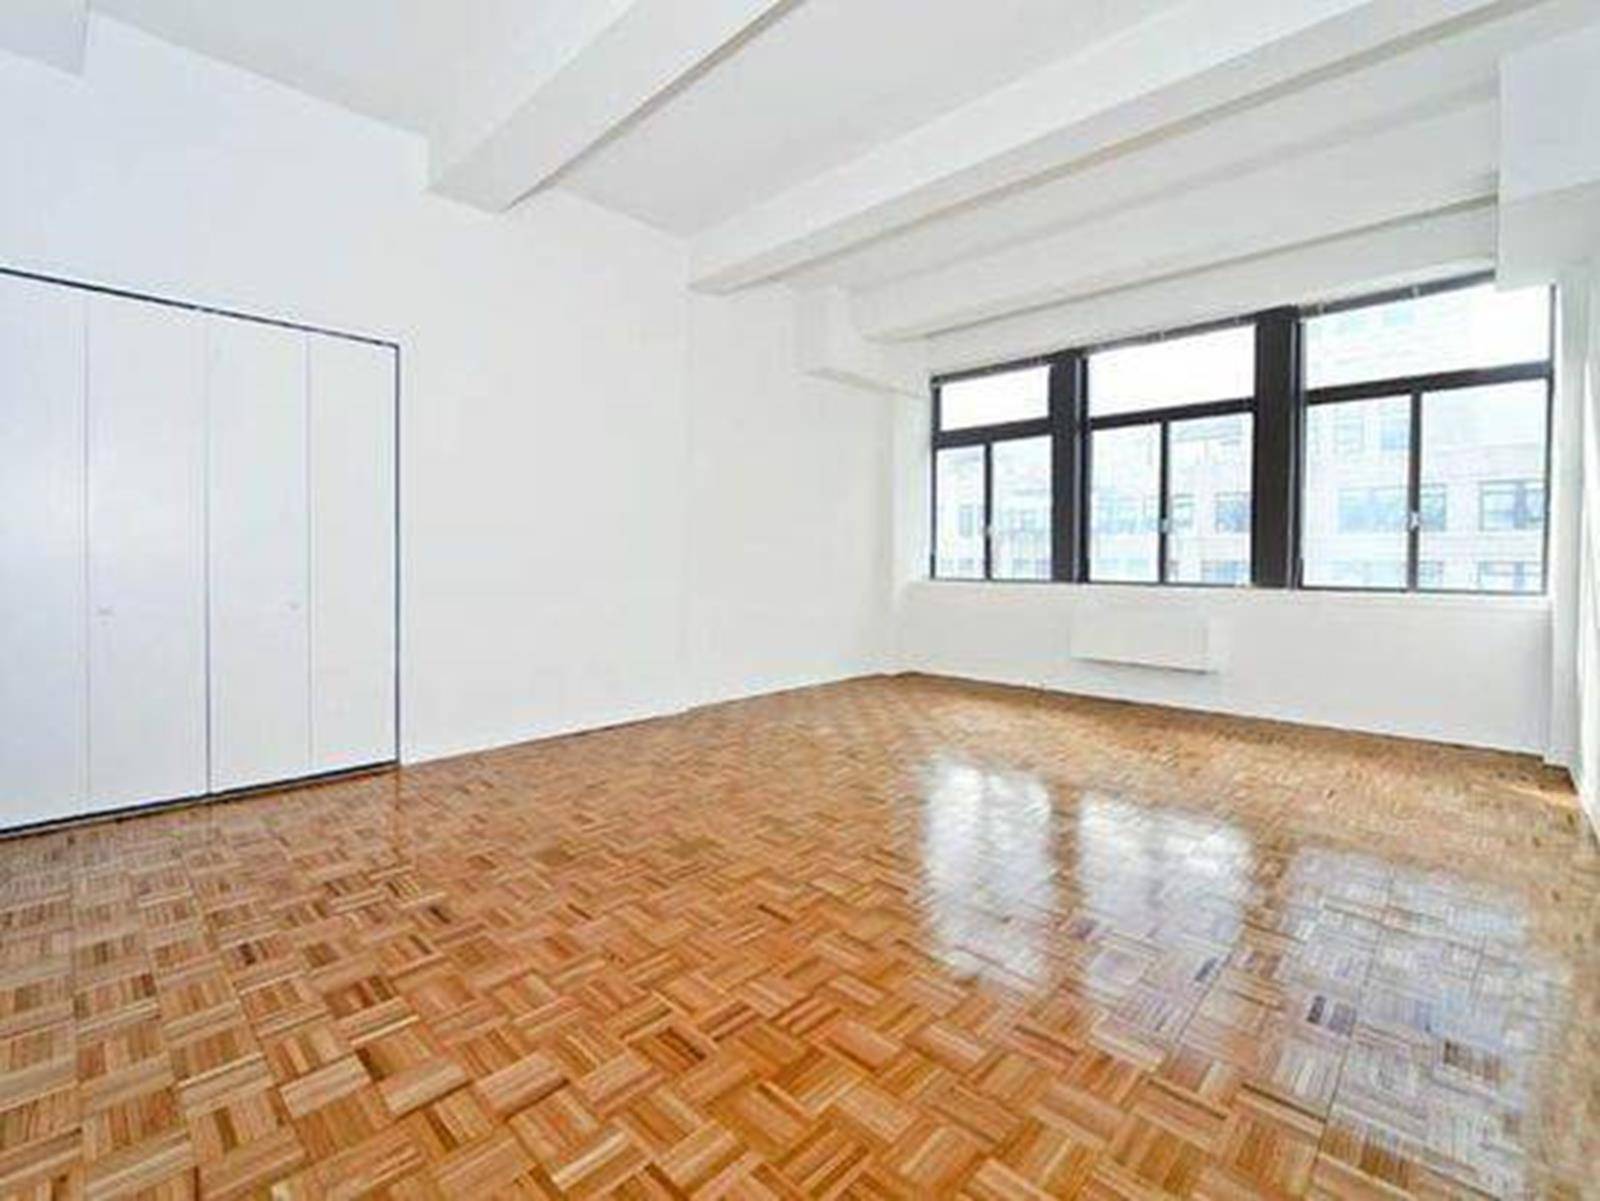 Artist Style Loft Apartment for Sale in Midtown Manhattan on the 17th Floor Excellent home or investment opportunity Grand Central Station is within short walking distance.